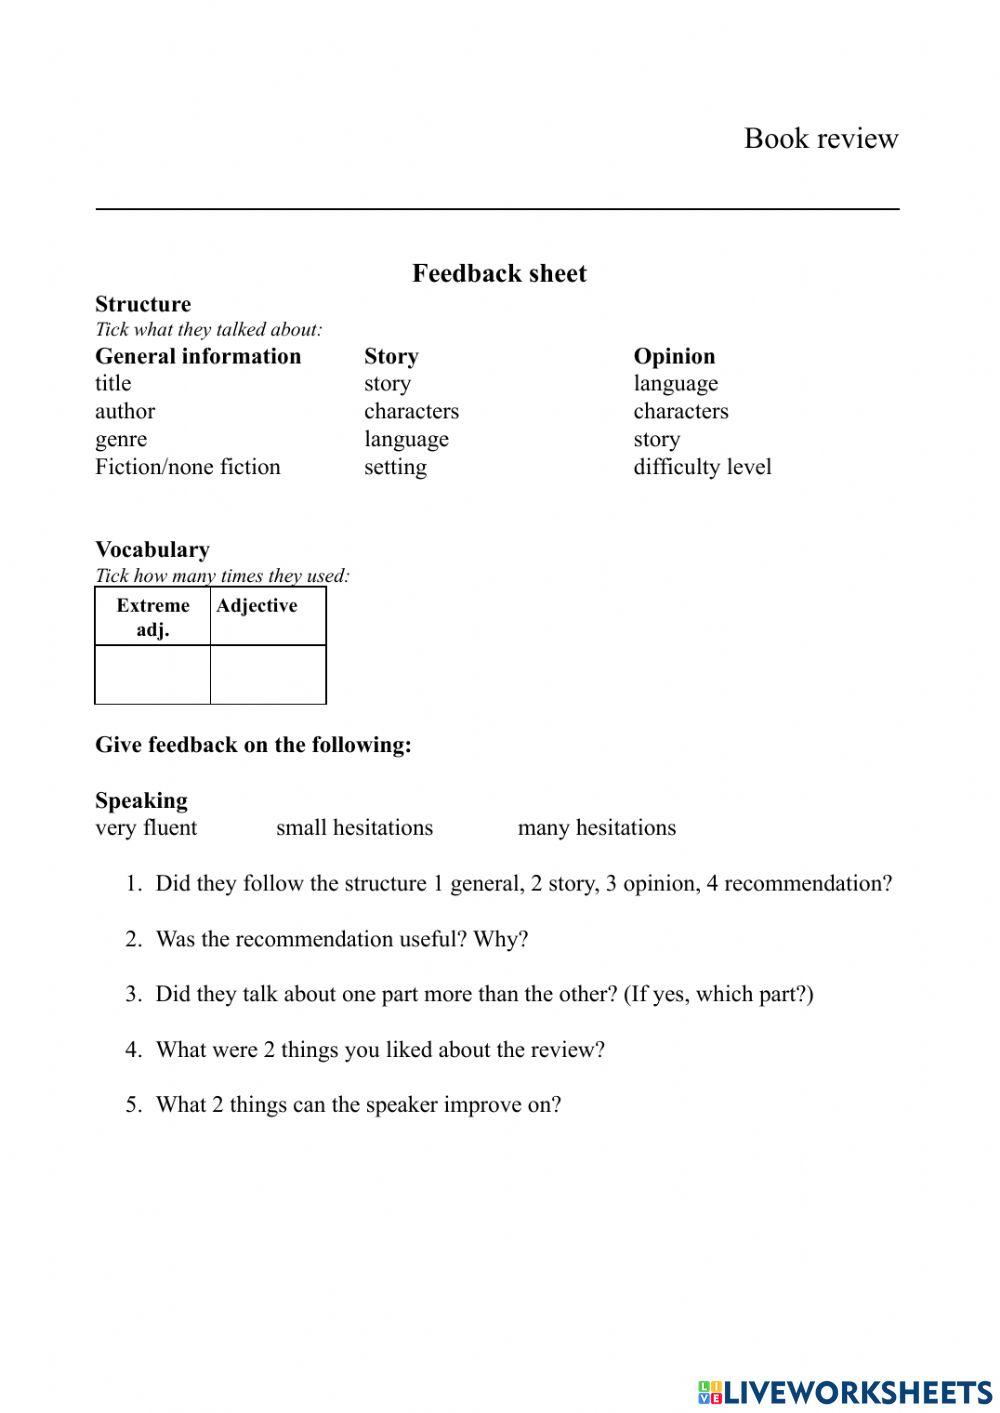 Book review student feedback form